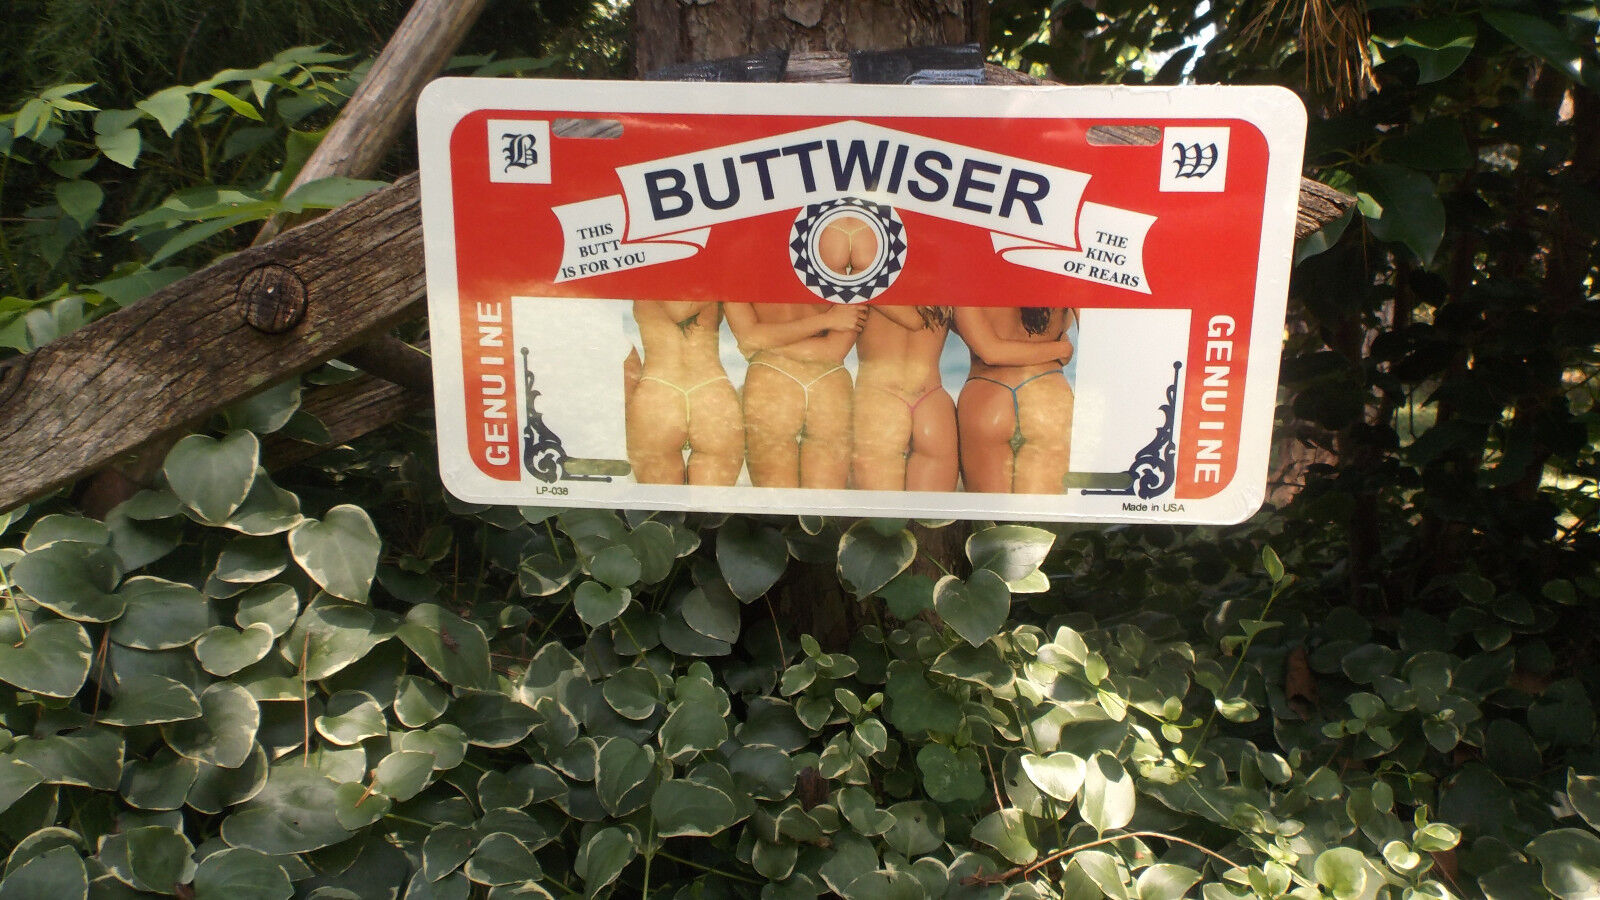 BUTTWISER GIRLS IN THONGS ADVERTISING LICENSE TAG PLATE SIGN MAN CAVE SIGN NEW